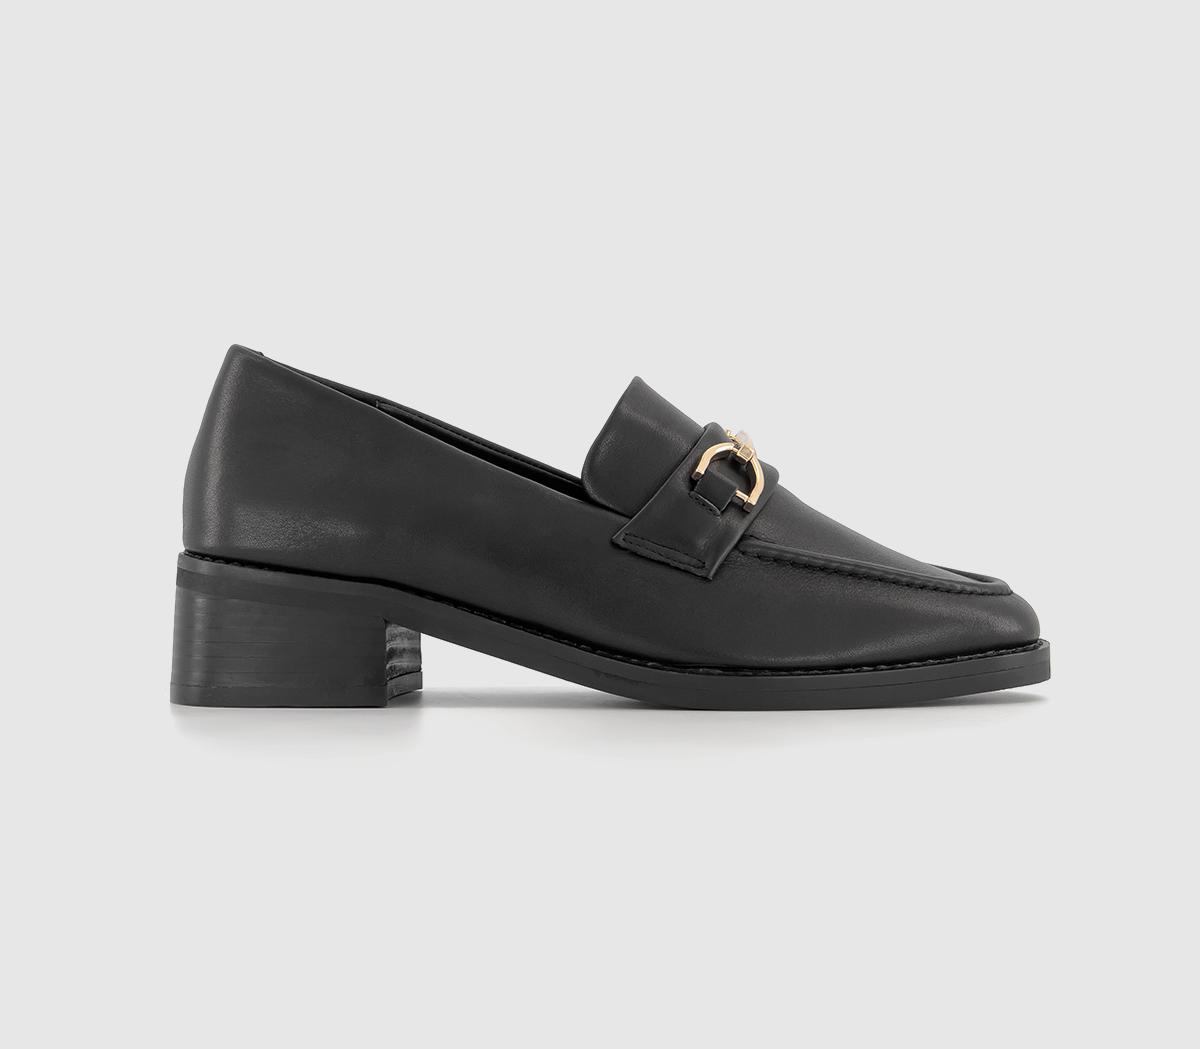 Flair Patent Leather Heel Loafers Black Leather